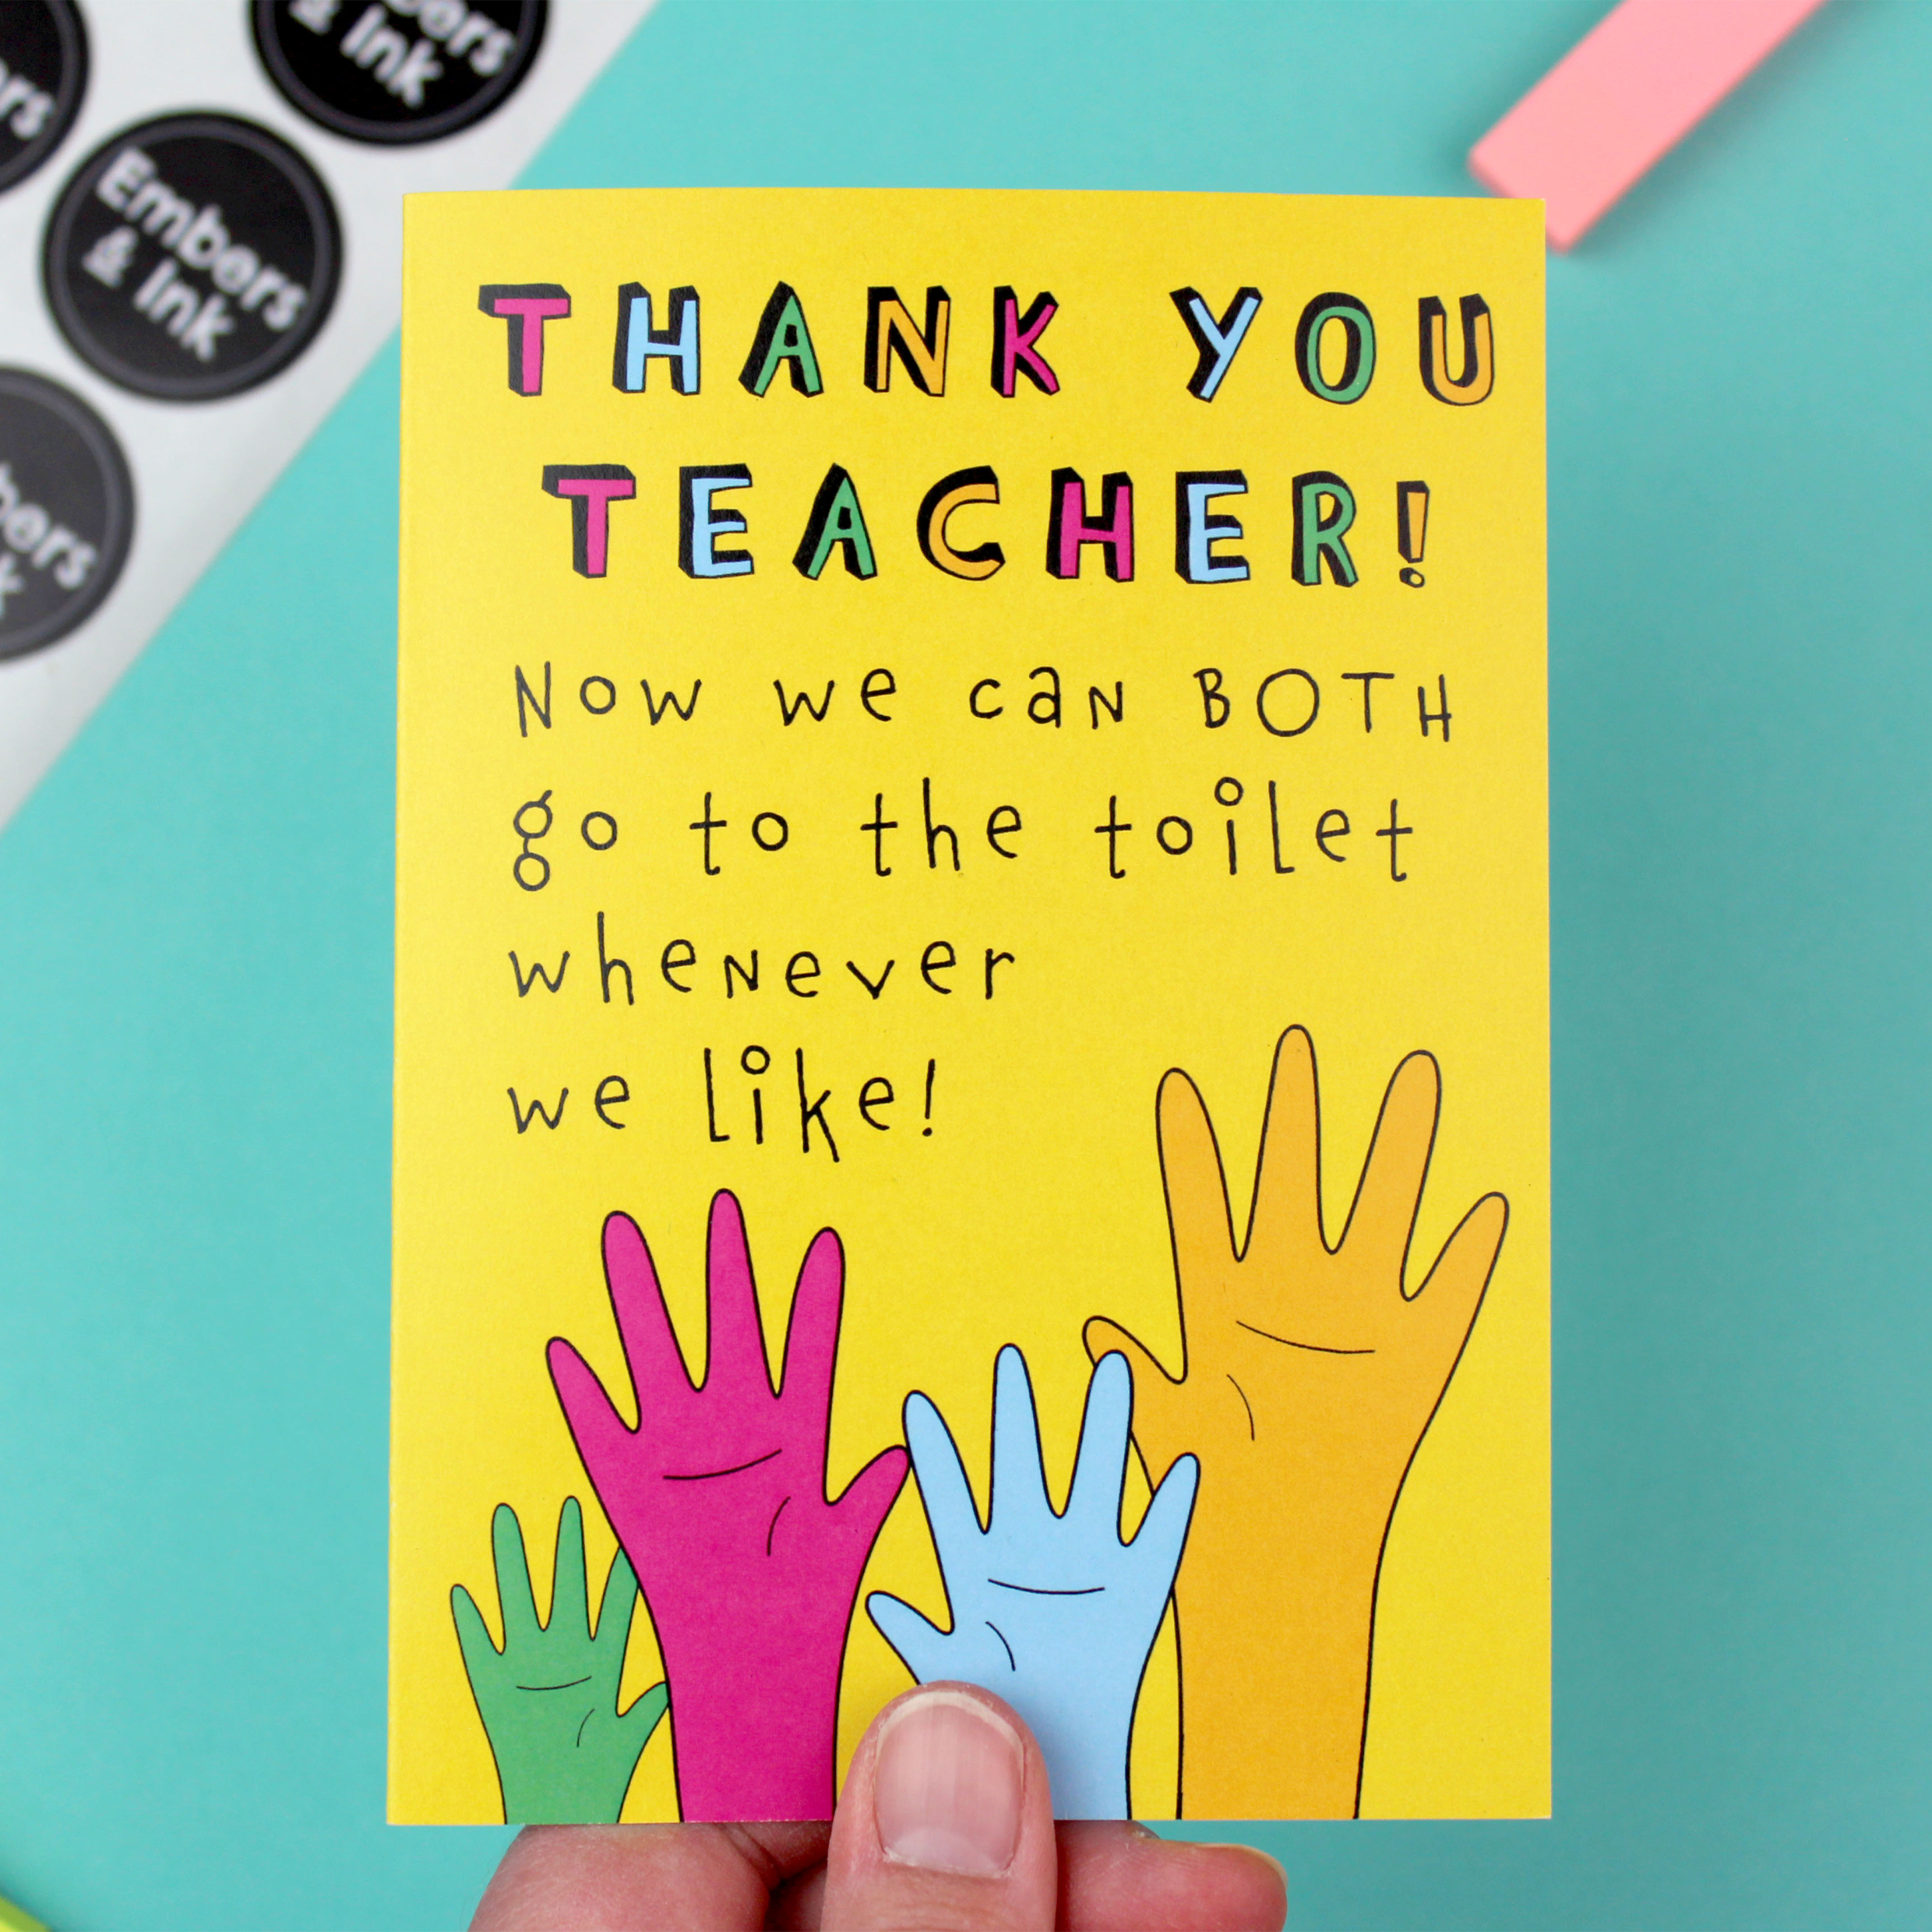 A hand holds a yellow card. The card has an illustration of four raised hands in green, pink, blue and orange. Above the hands are the words 'Thank You Teacher, now we can both go to the toilet whenever we like'.